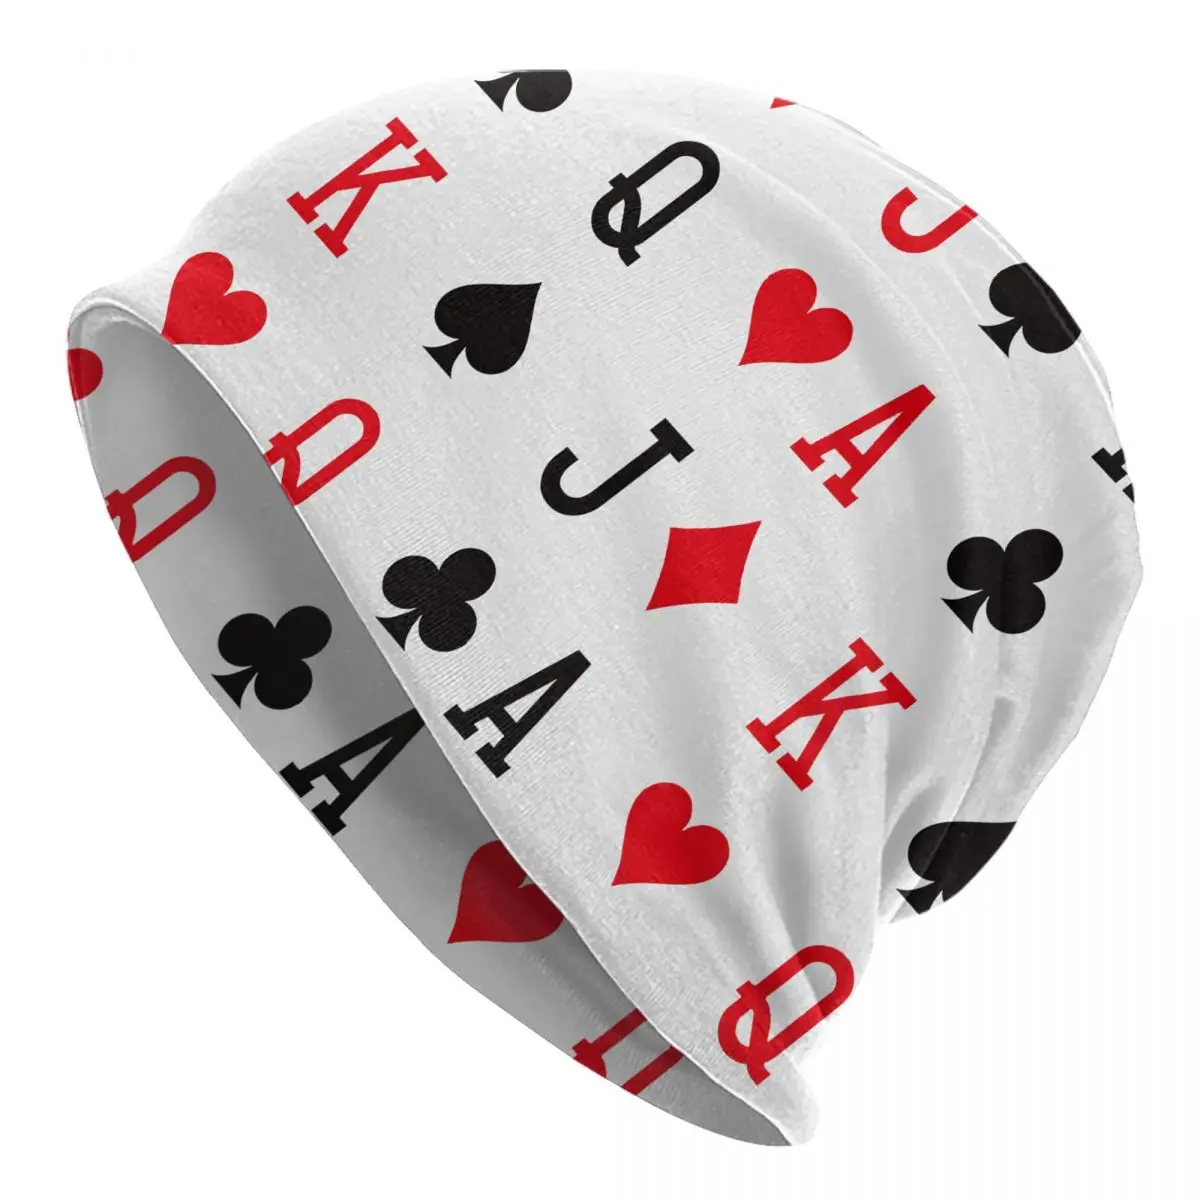 Ace King Queen Jack Spades Hearts Diamonds Clubs Patter Adult Men's Women's Knit Hat Keep warm winter Funny knitted hat